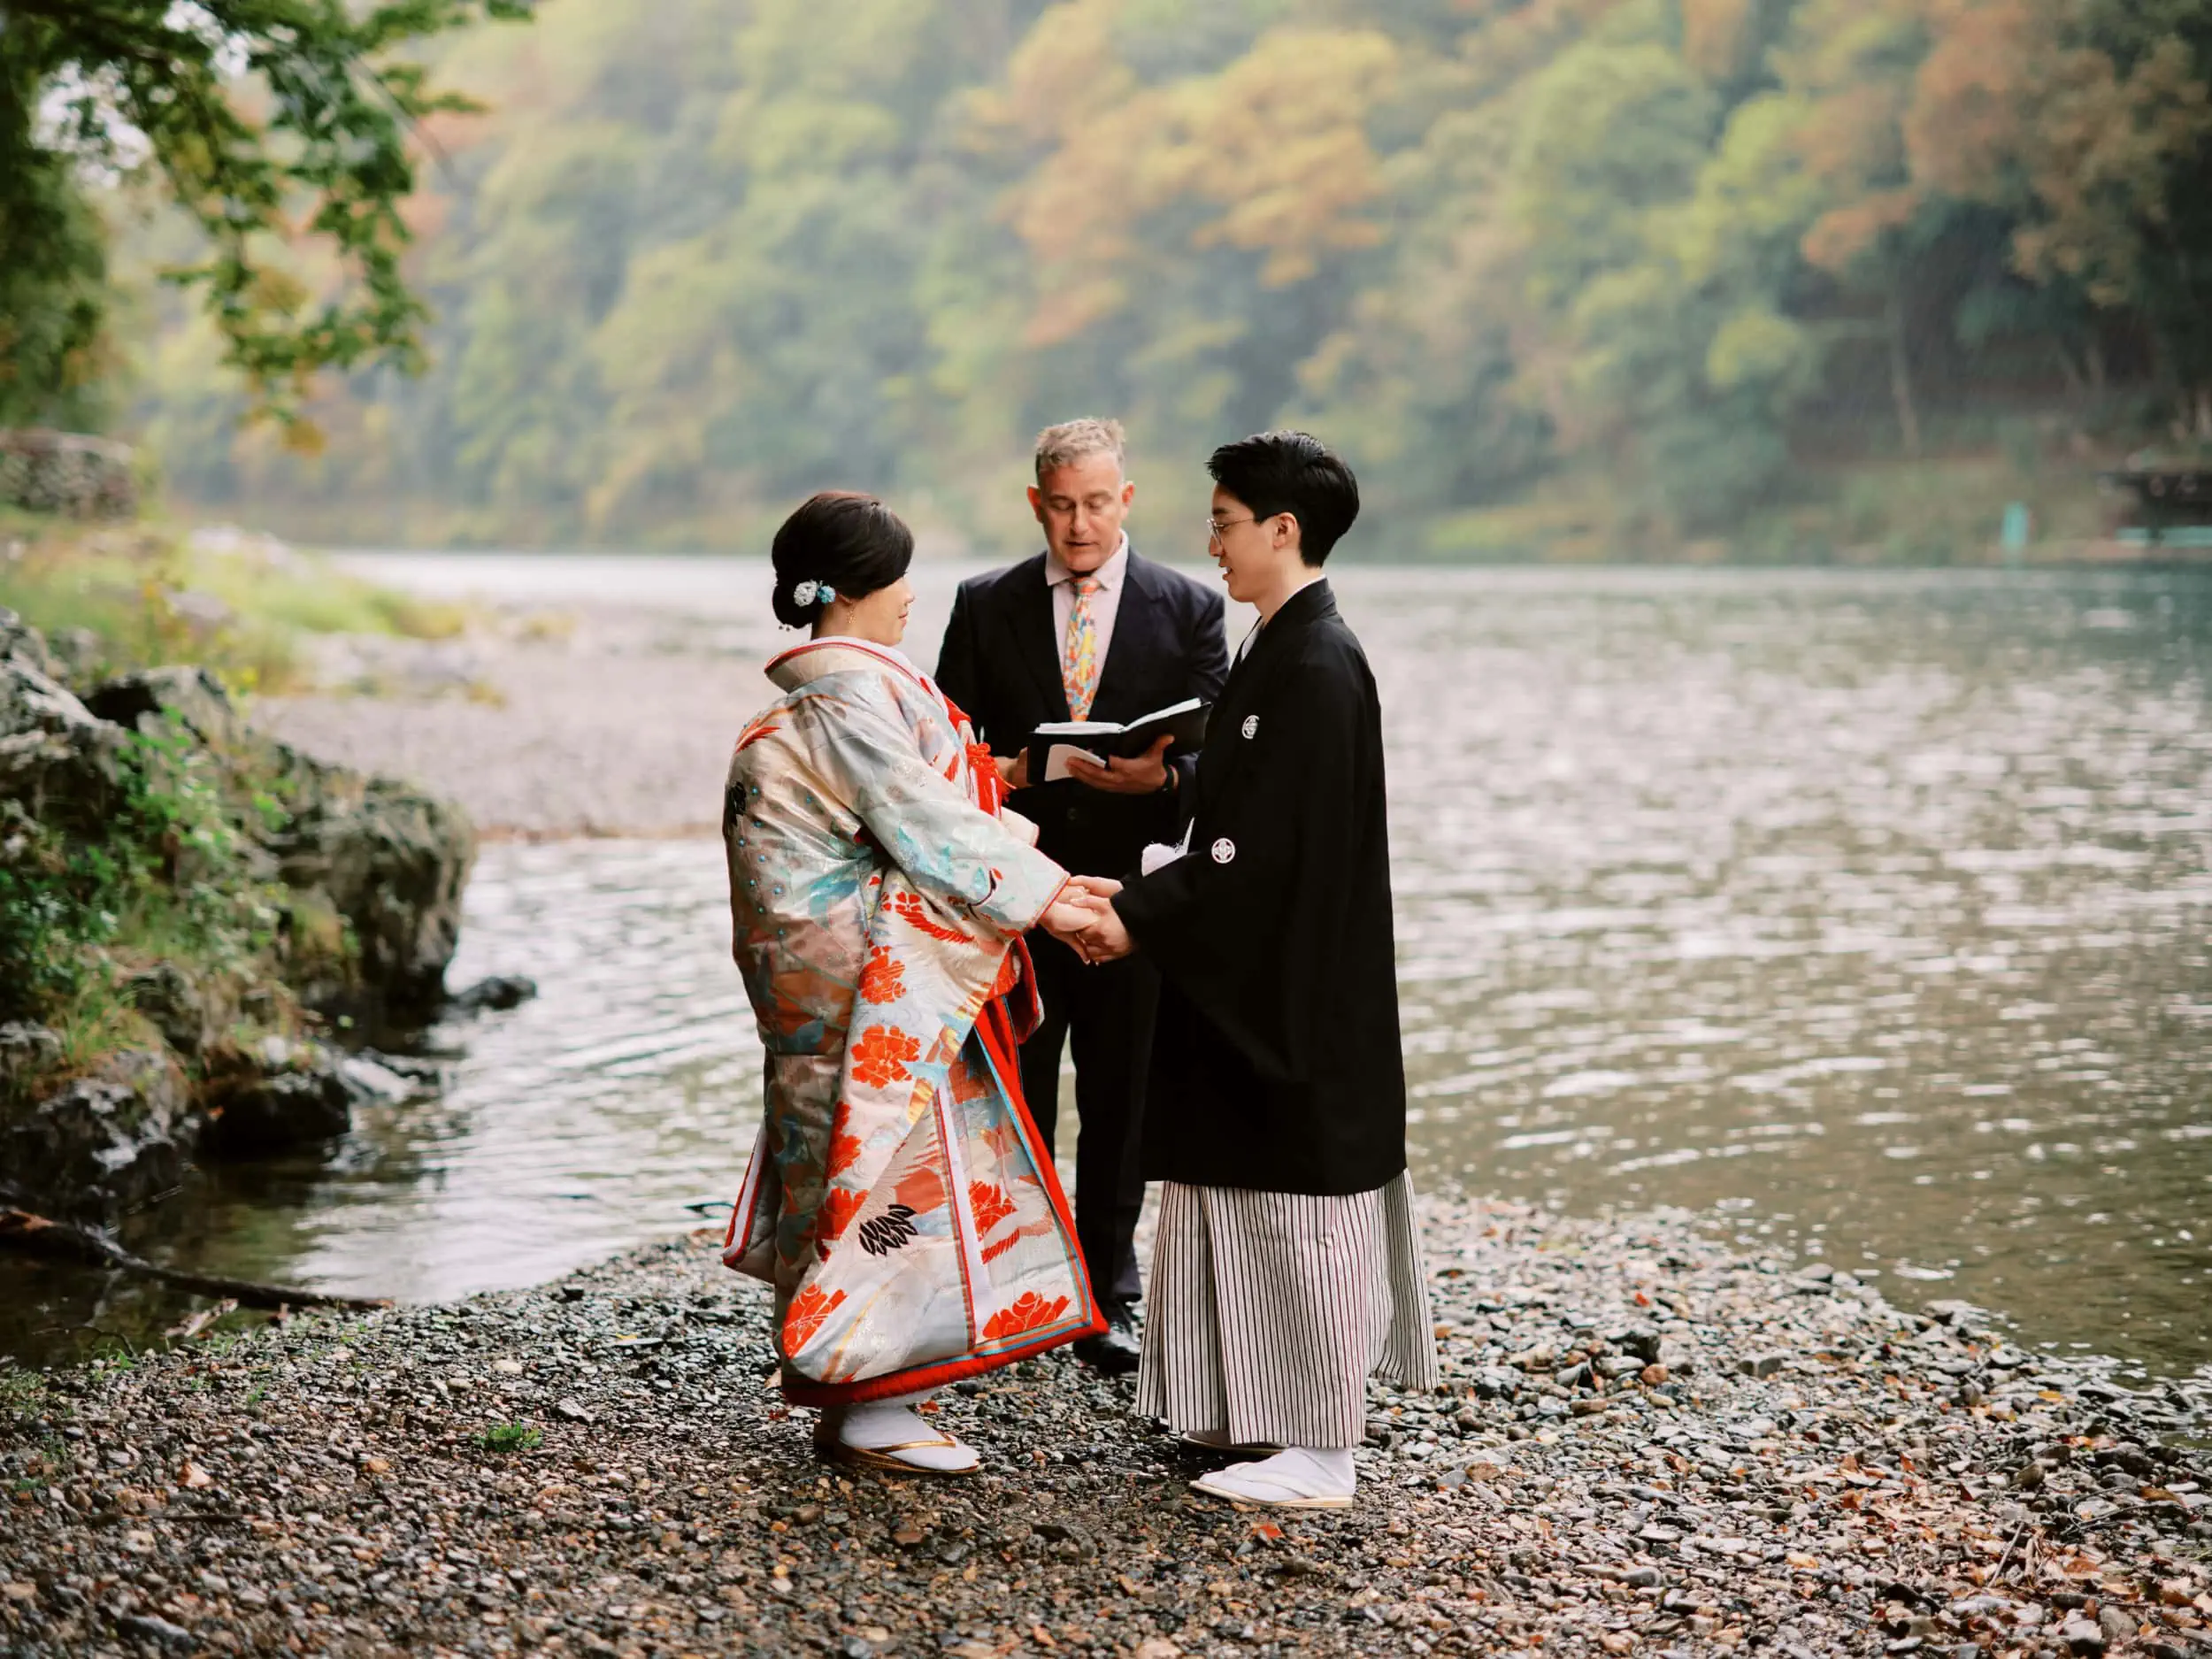 Queenstown New Zealand Elopement Wedding Photographer -         Queenstown Wedding Photographer: A man and woman in kimono standing next to a river captured by James.